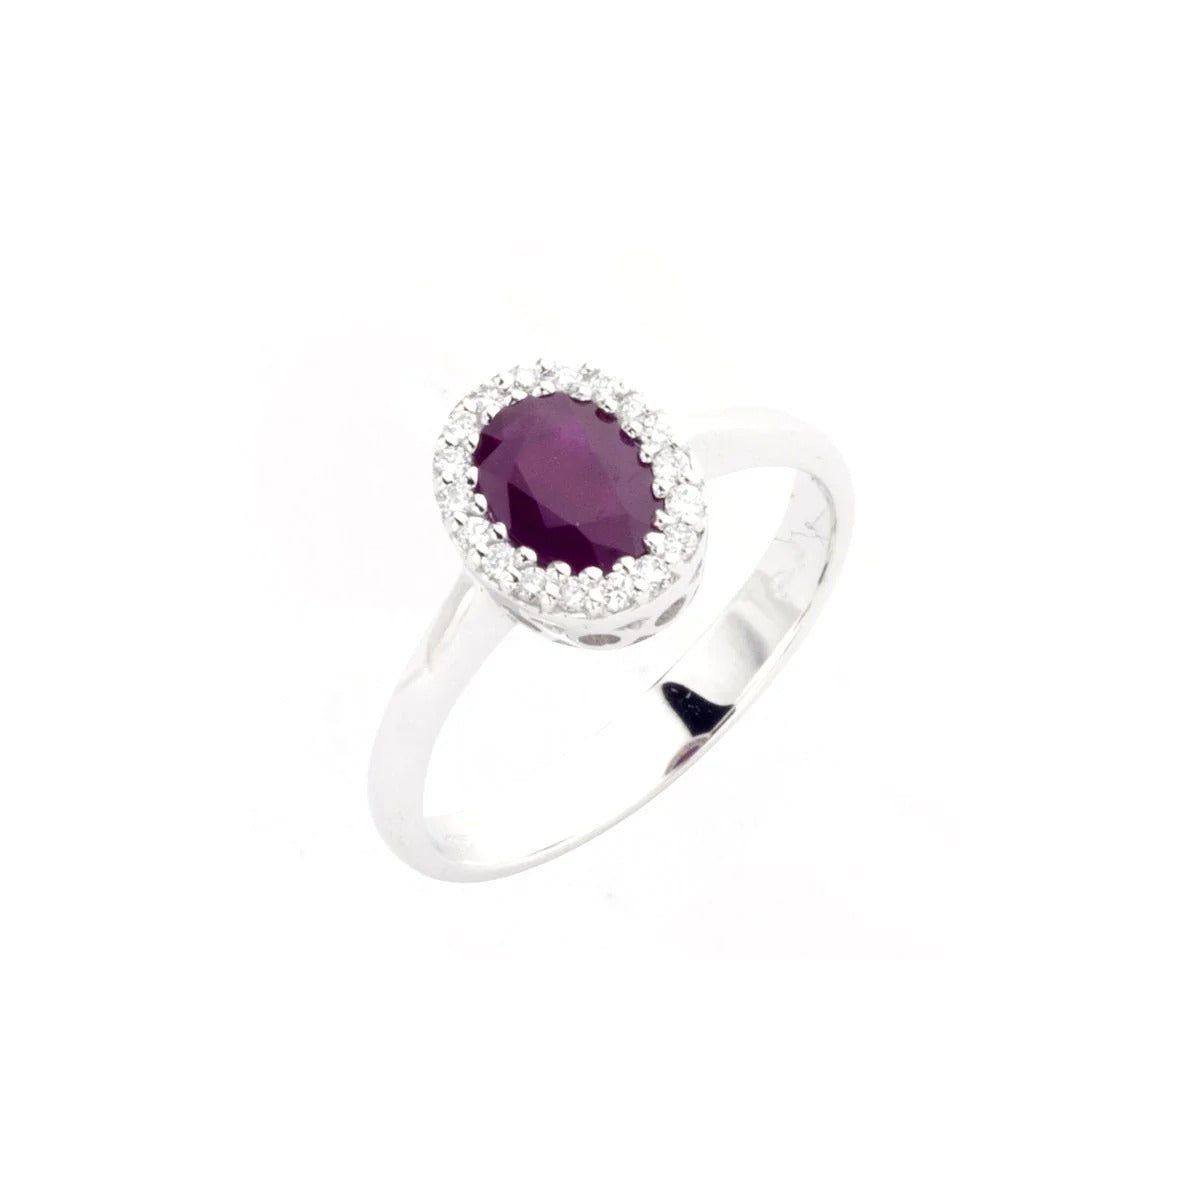 Diana - Ring in White Gold, Diamonds and Ruby, 0.68ct rubies - AN DIANA 39 RU